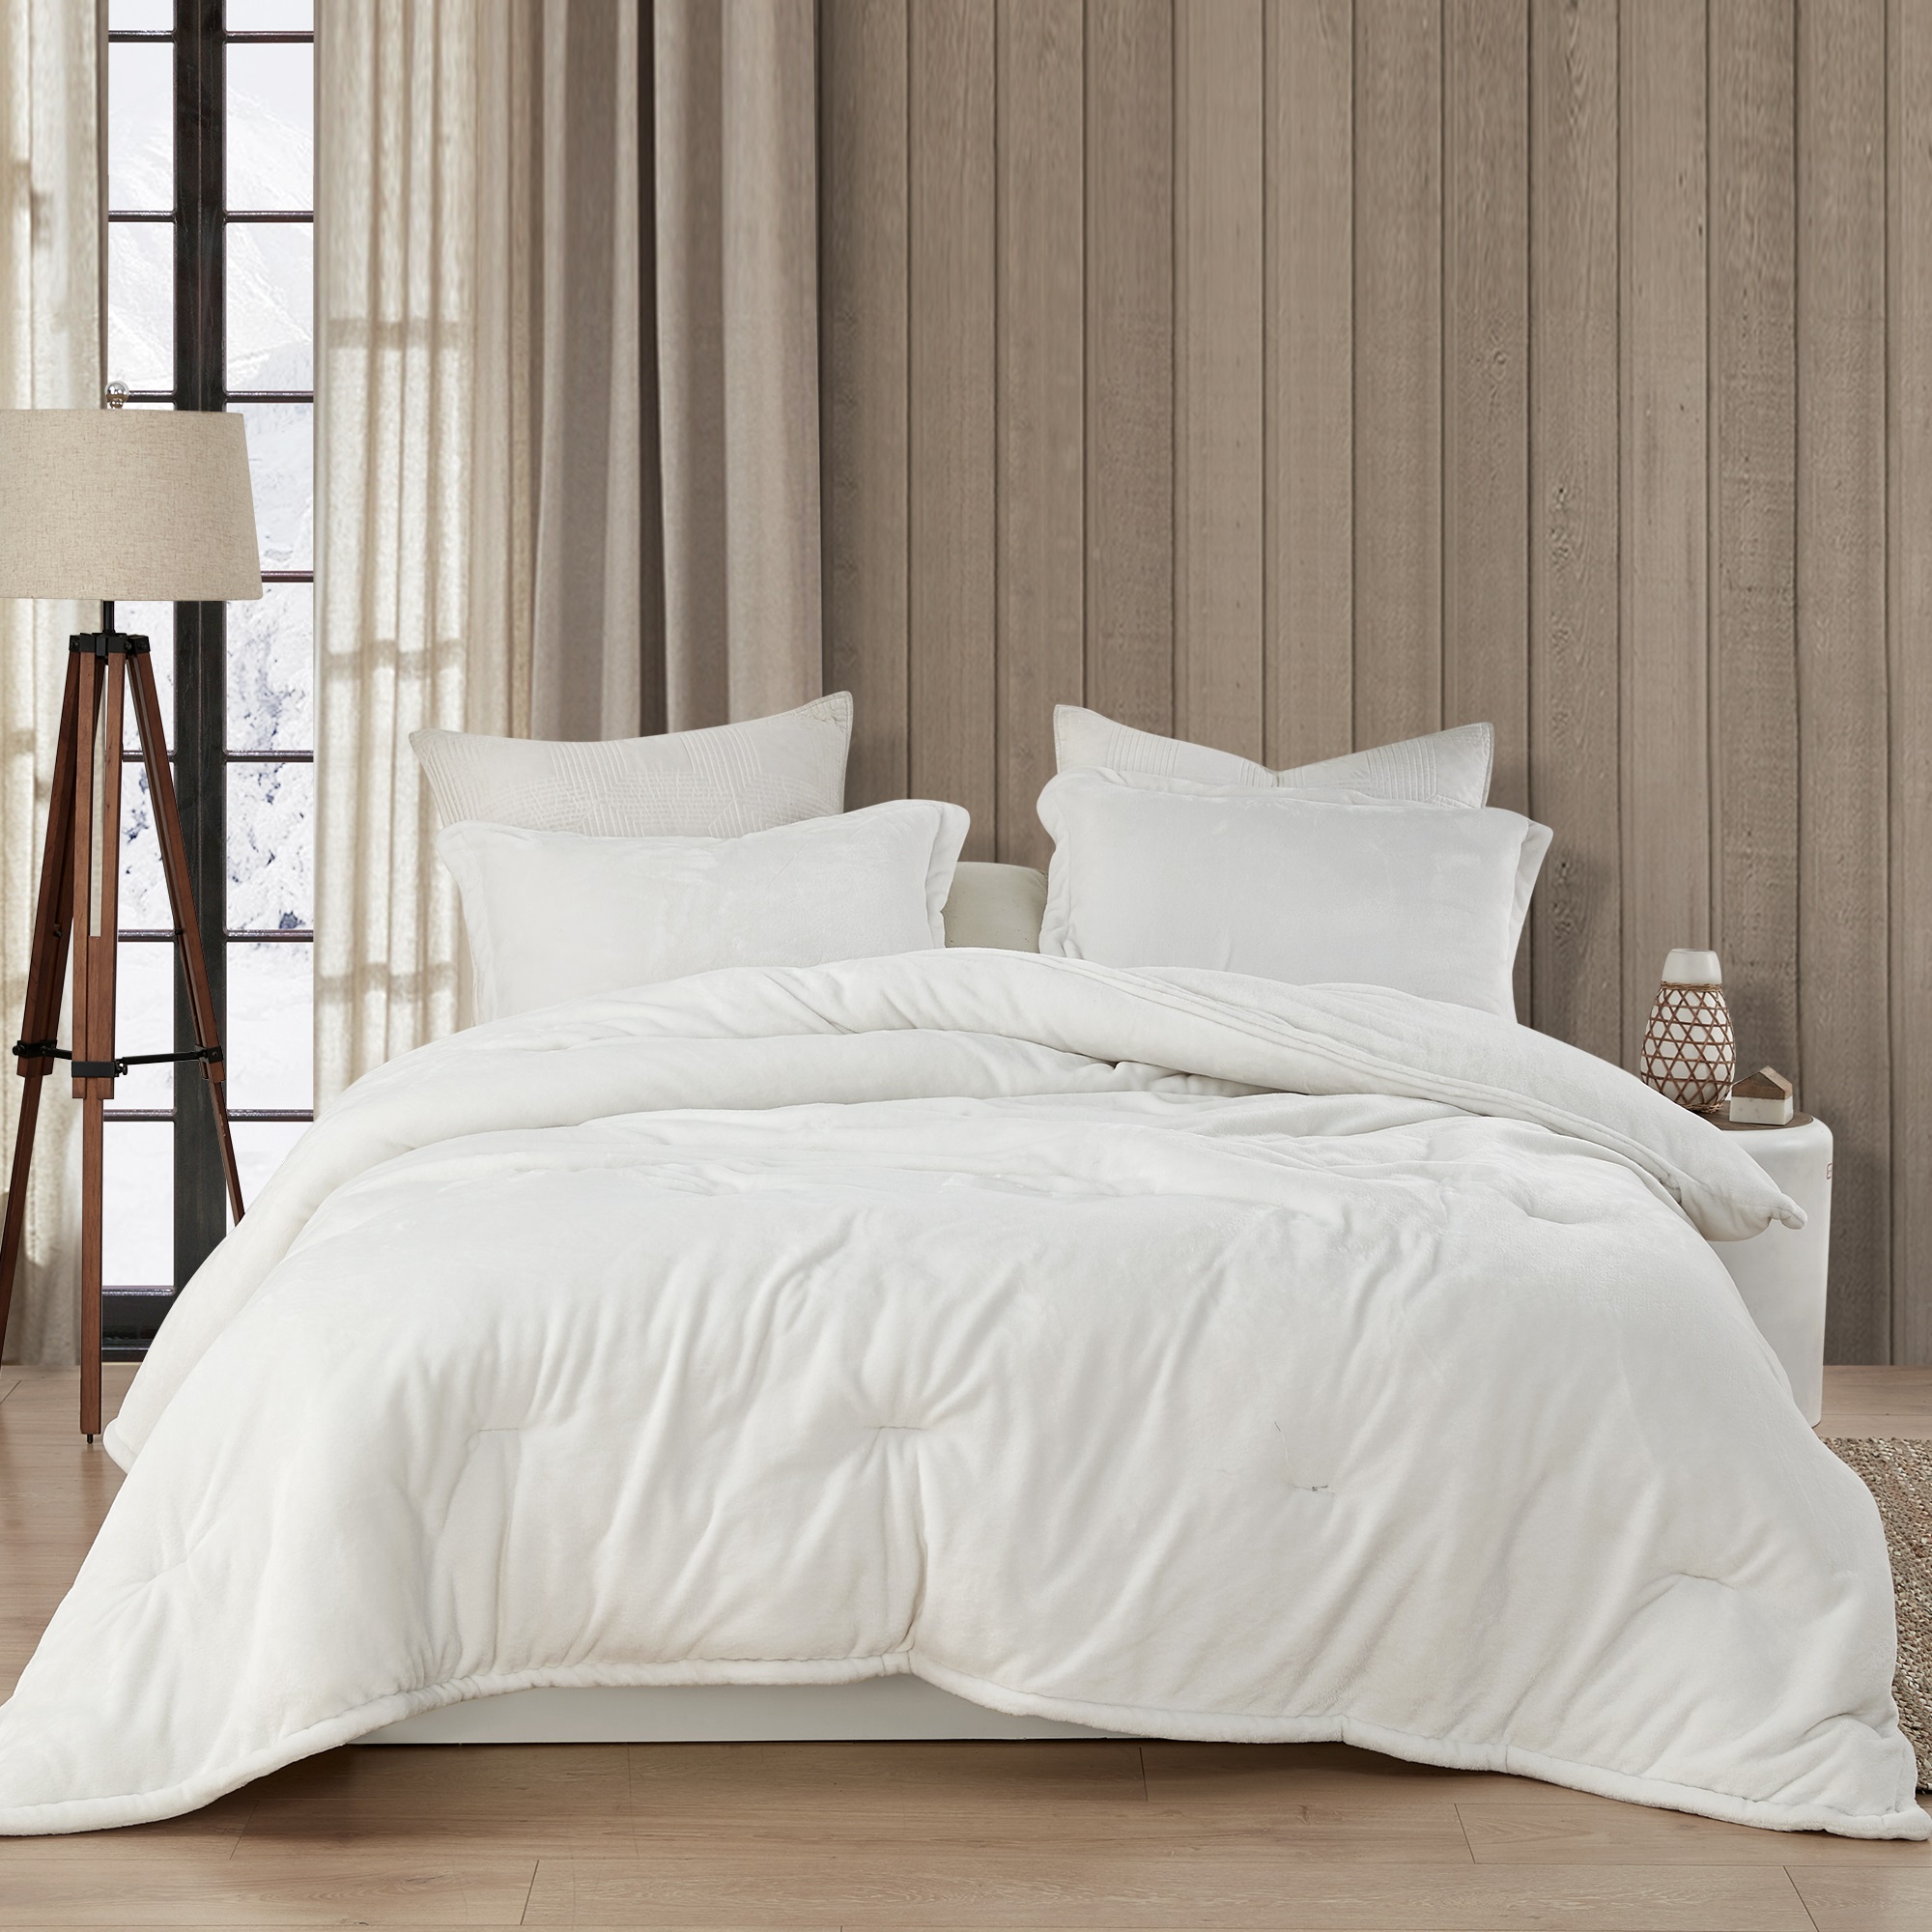 Coma Inducer Oversized Comforter - Wait Oh What - Farmhouse White